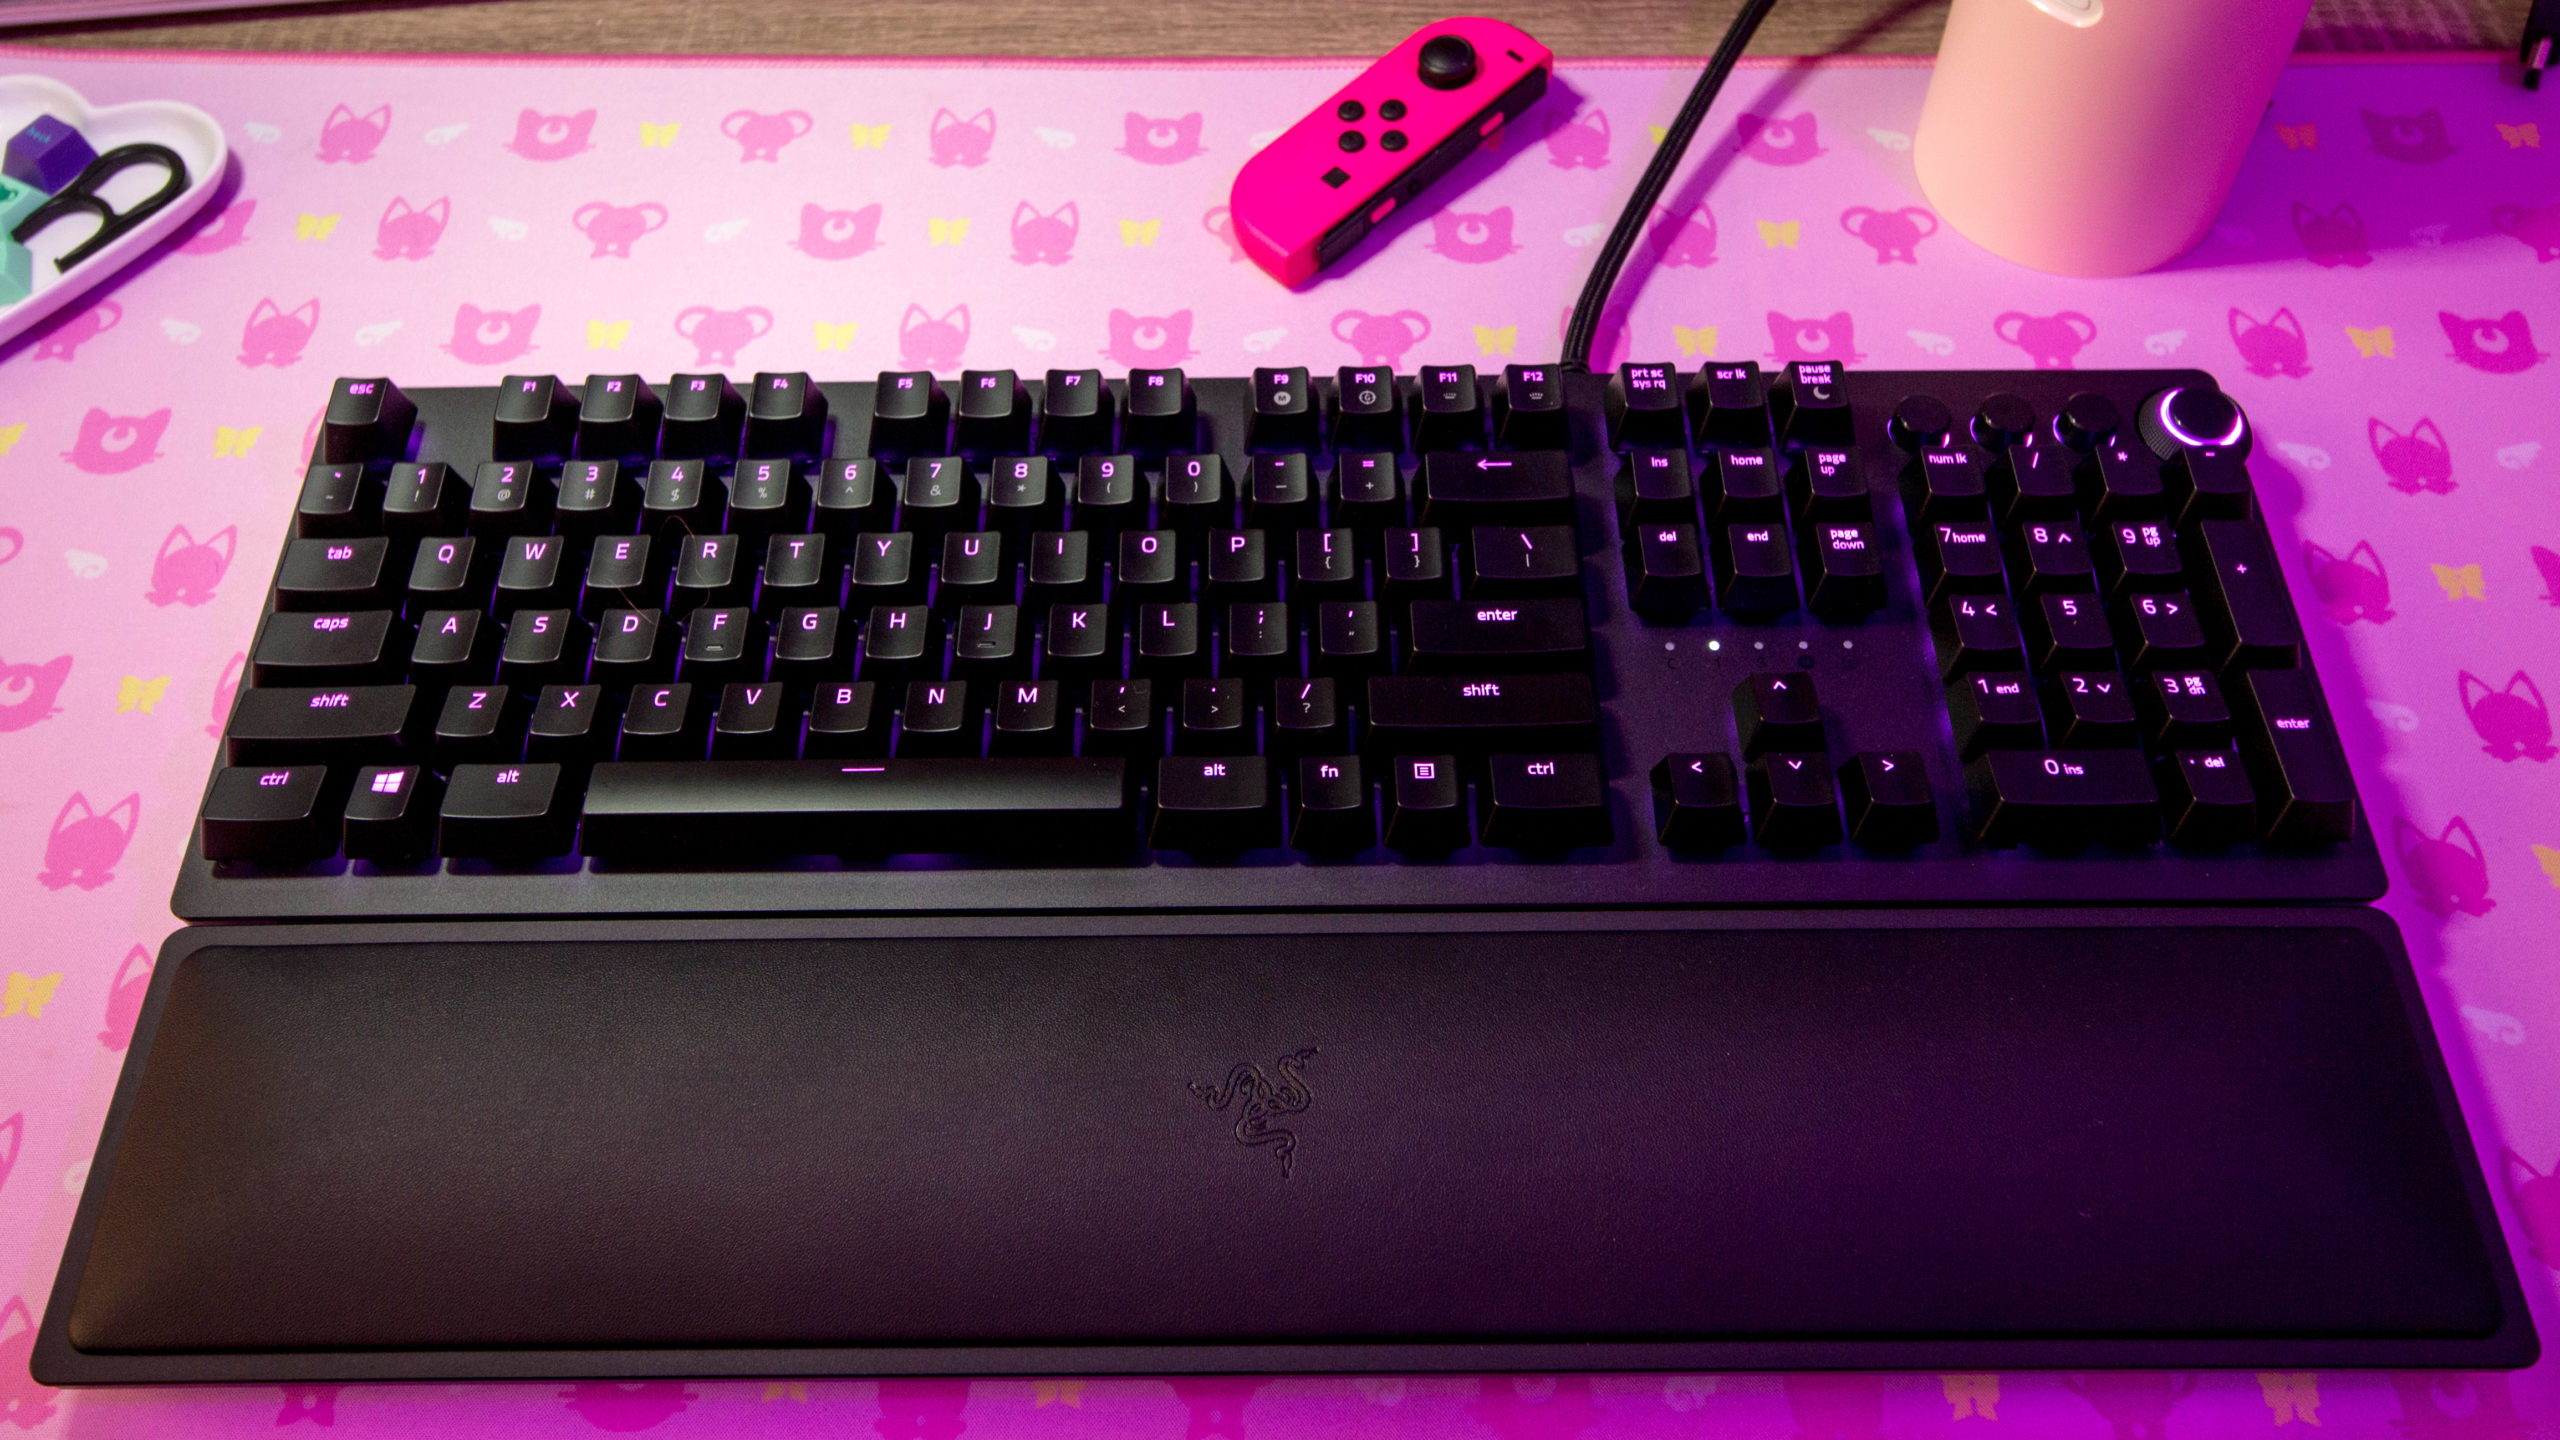 If you're hardcore into gaming, invest in a mechanical gaming keyboard like the Razer Huntsman Elite. (Photo: Florence Ion/Gizmodo)